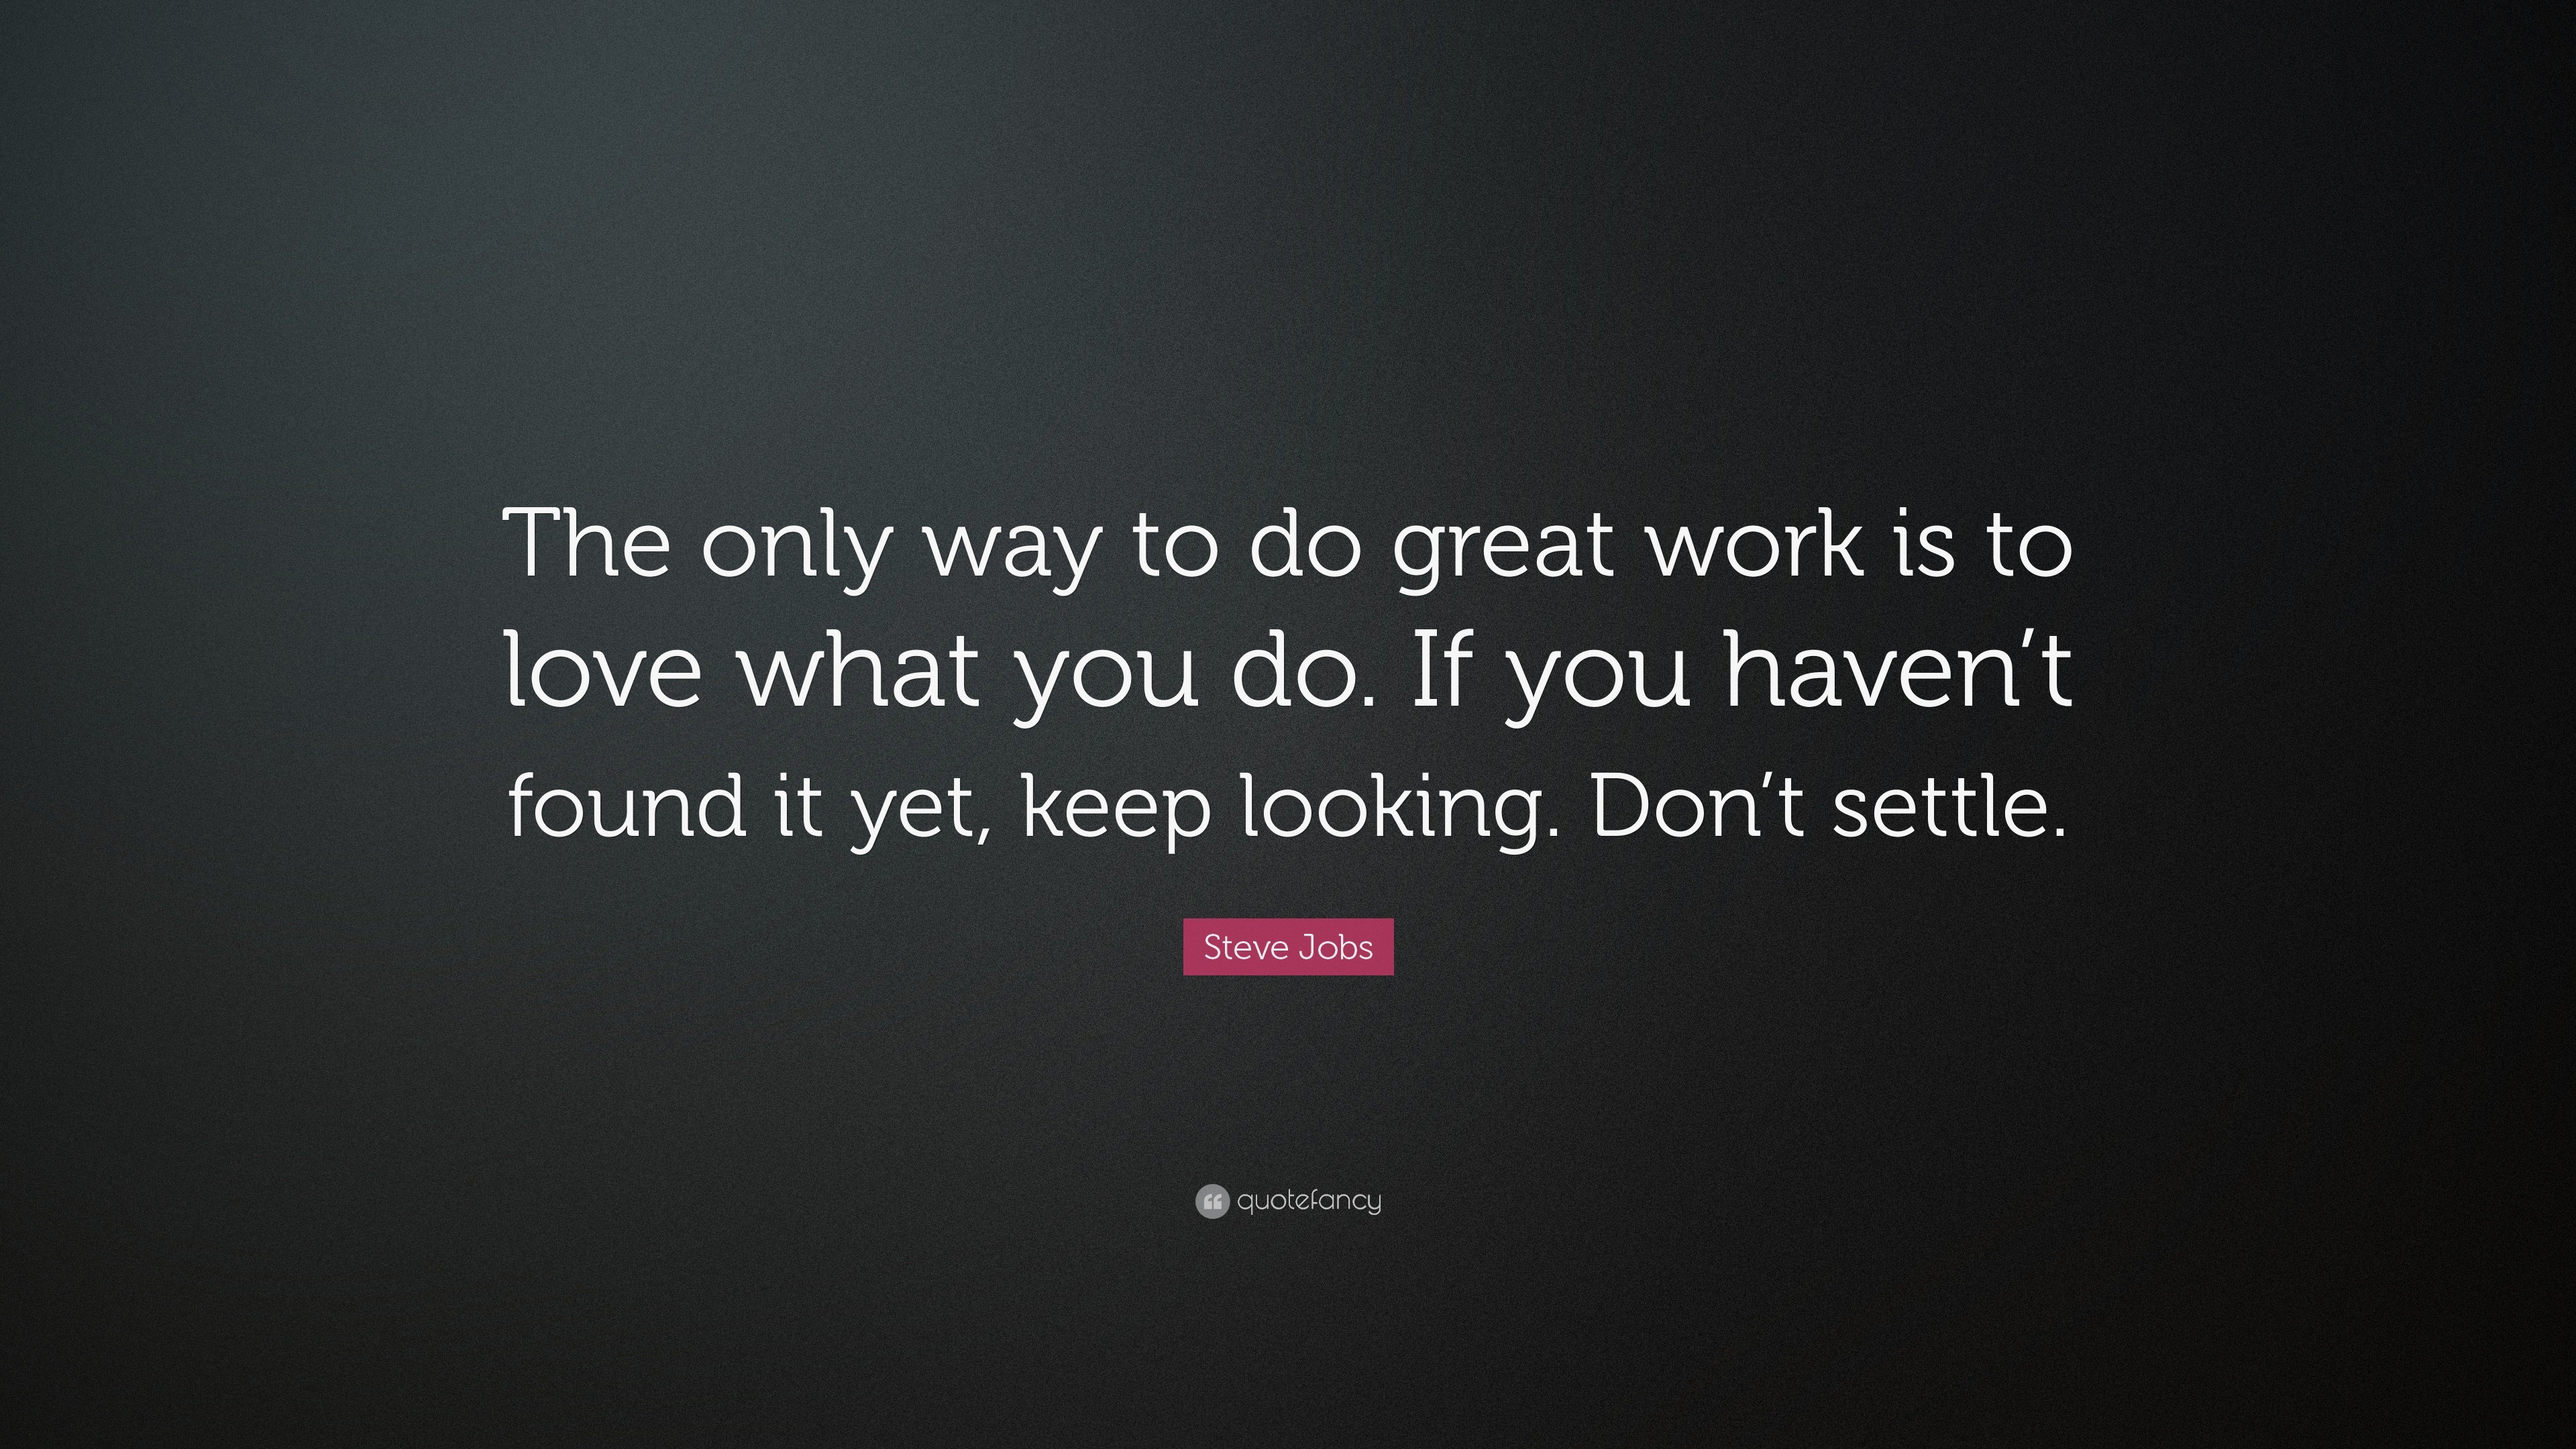 Steve Jobs Quote: “The only way to do great work is to love what you do.